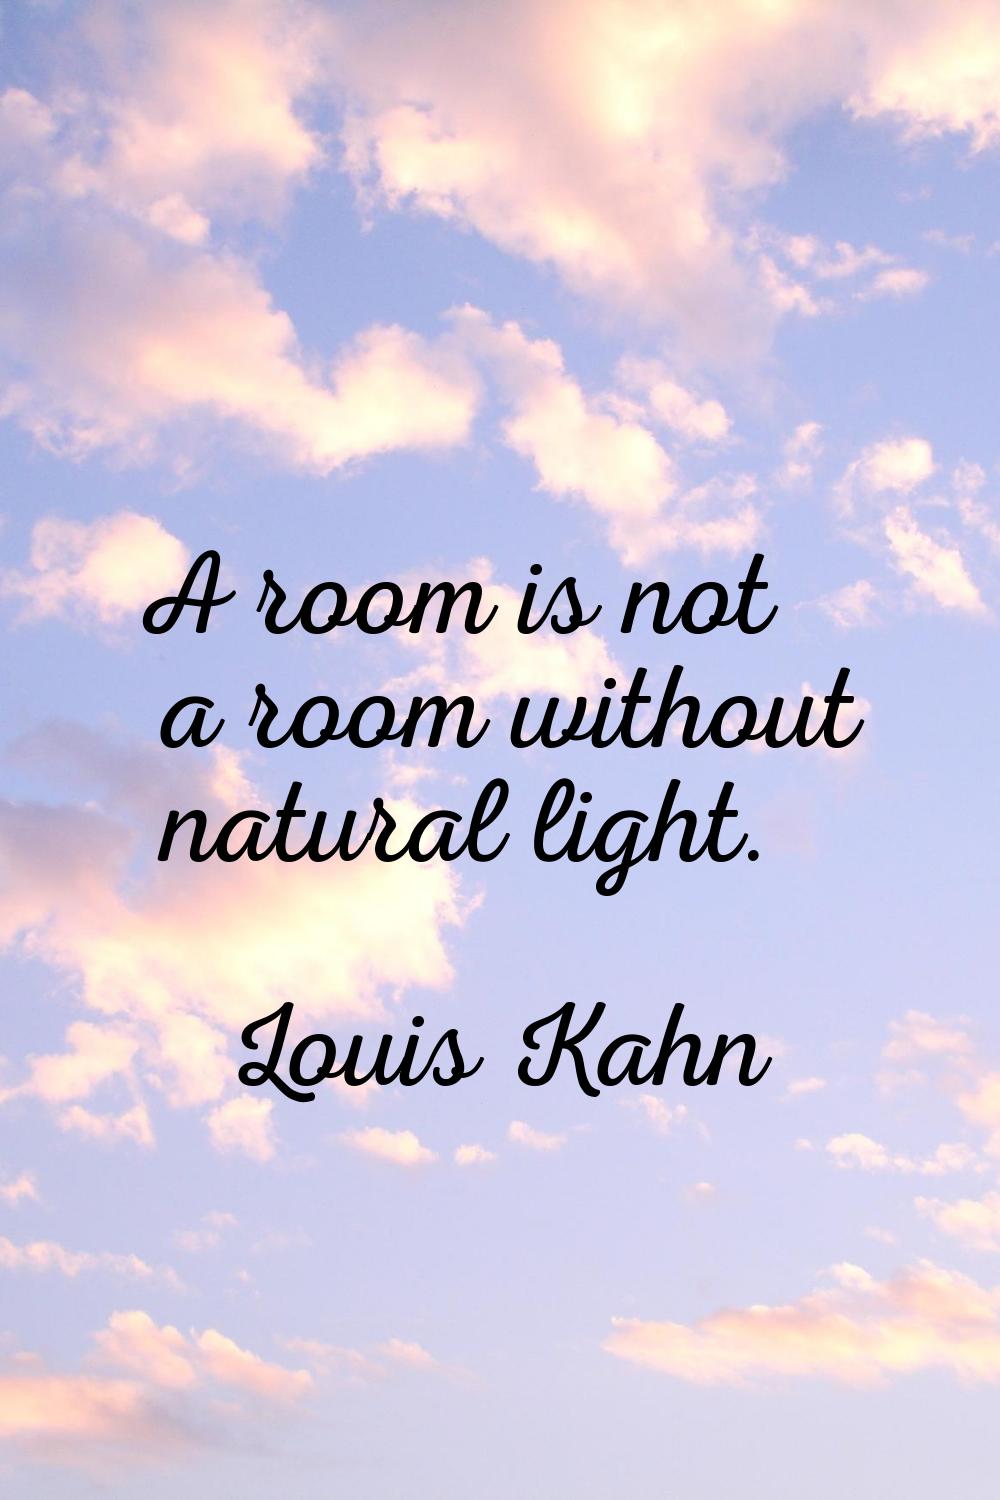 A room is not a room without natural light.